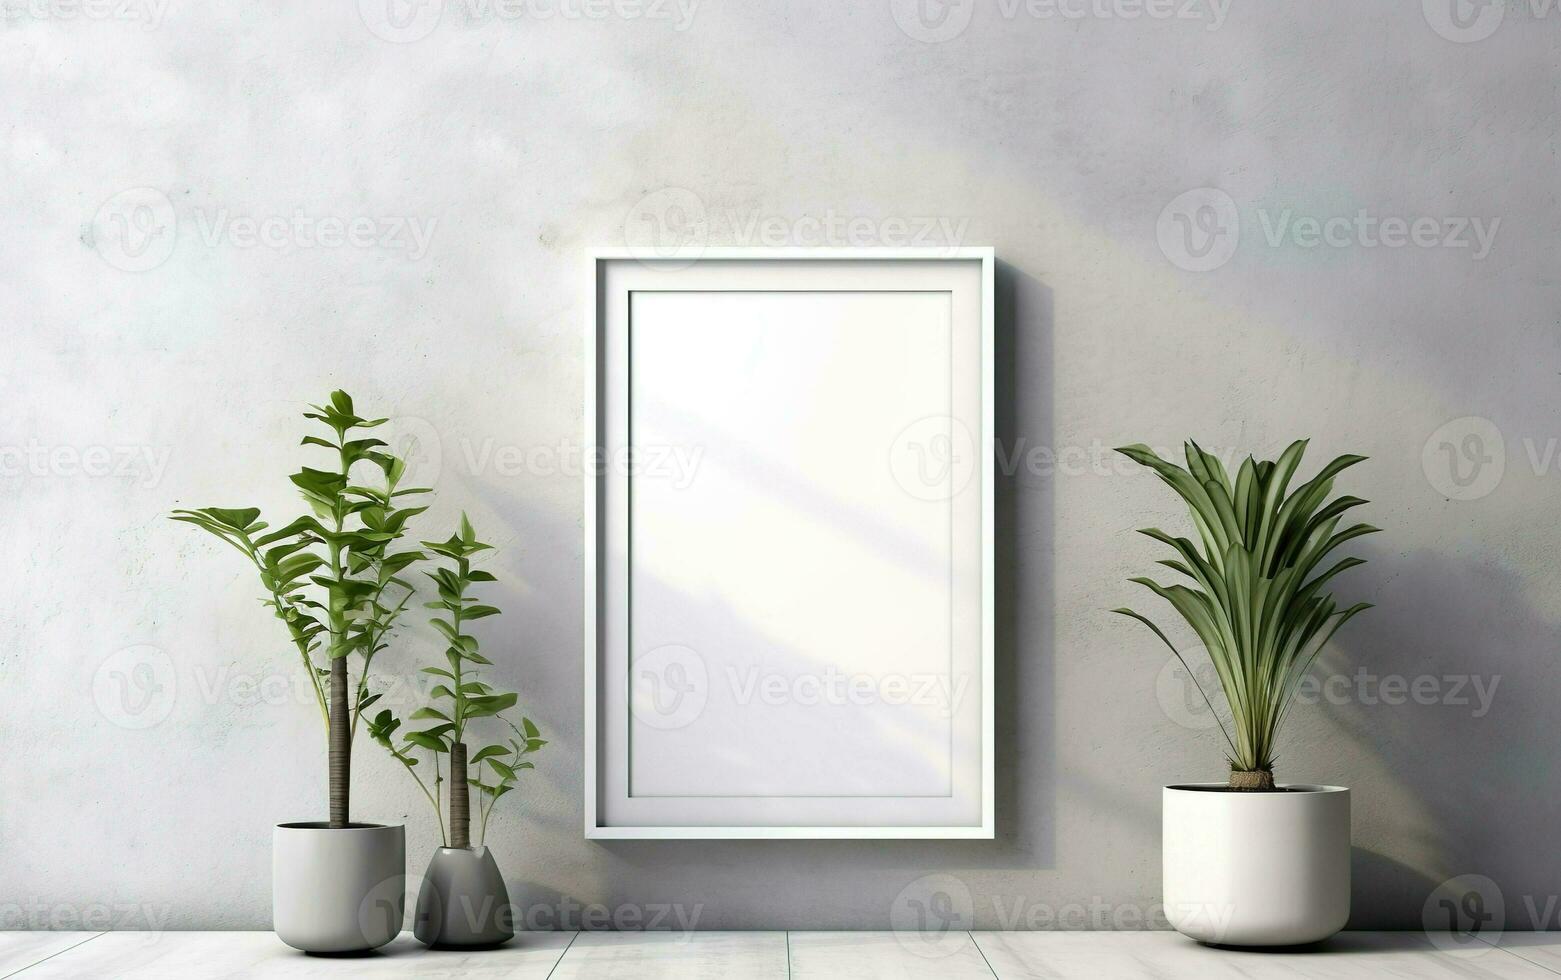 Wooden frame mockup over grey wall with green plants in vase, blank vertical frame with copy space. Sunlight and foliages leaves shadow. Contemporary interior mockup. photo